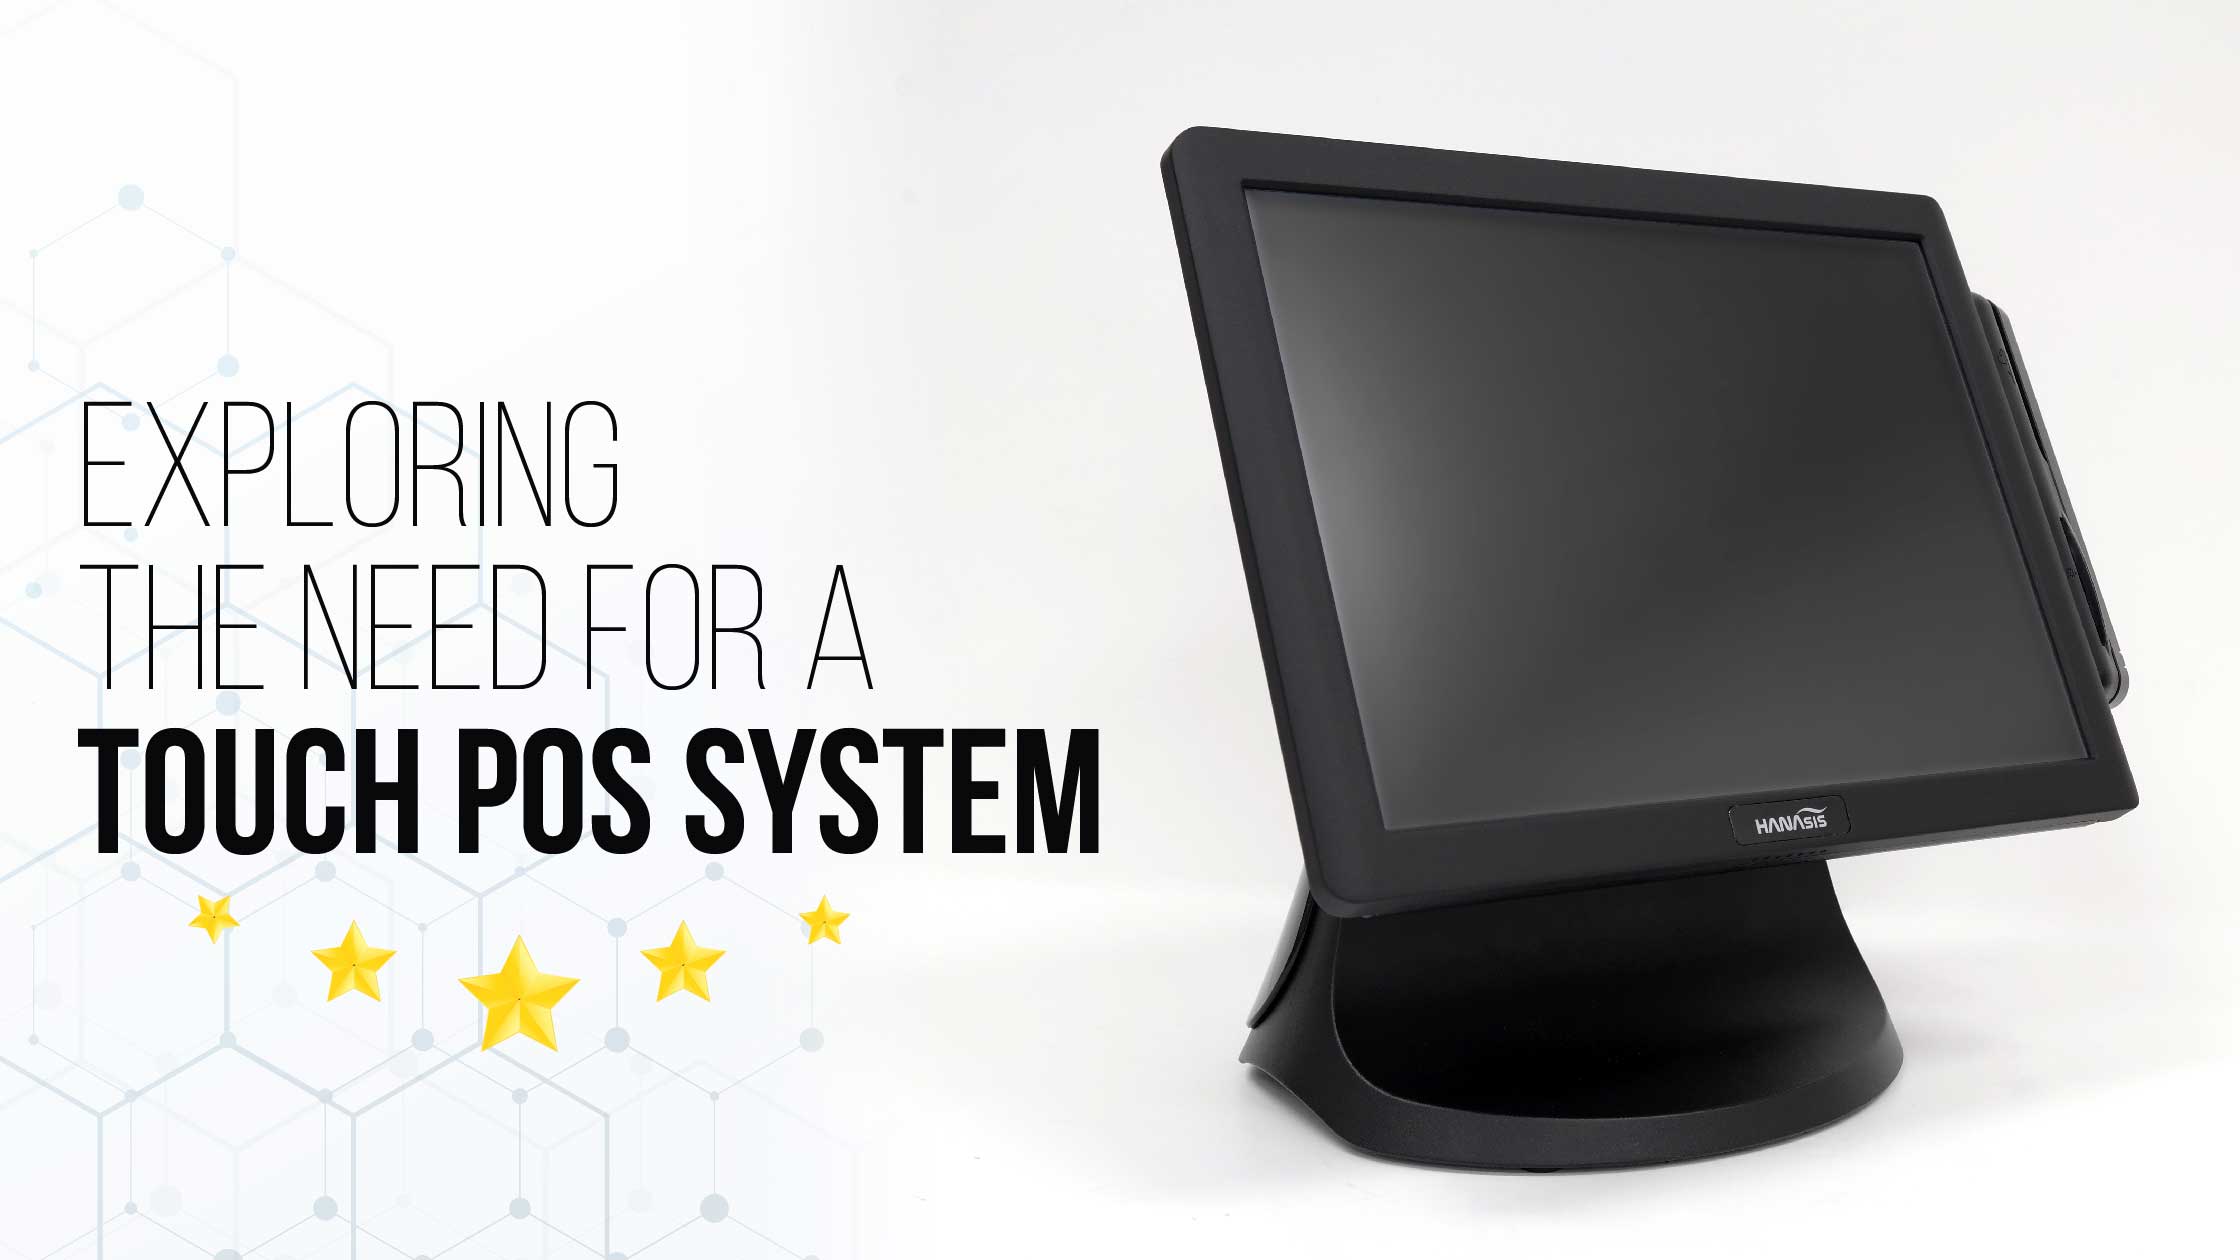 Exploring the need for a touch pos system